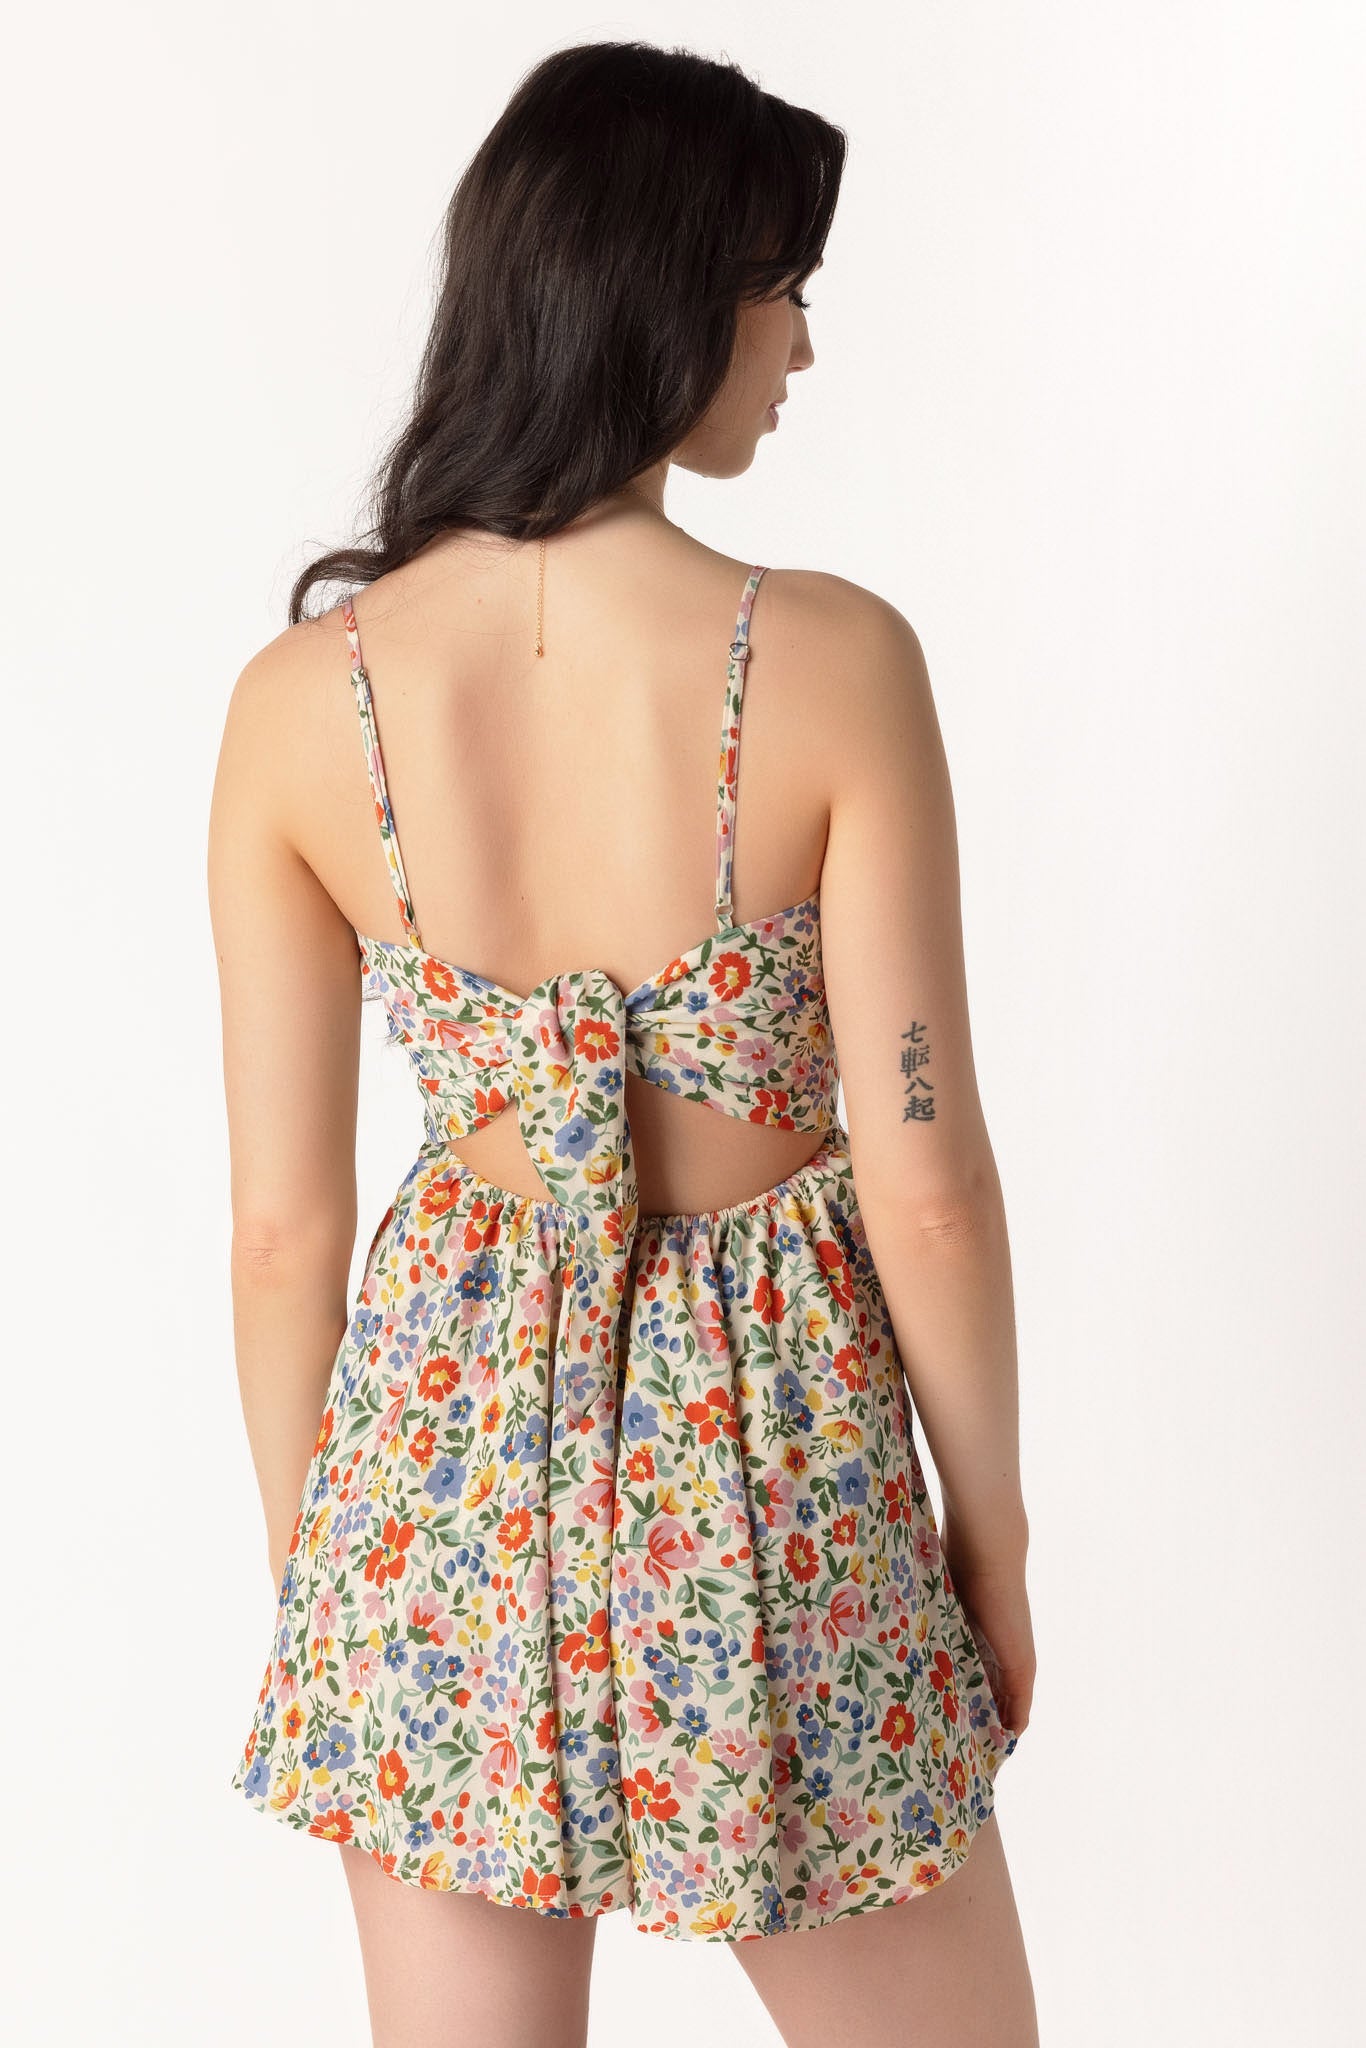 Ditsy Emma Bust Romper with Tie-Back